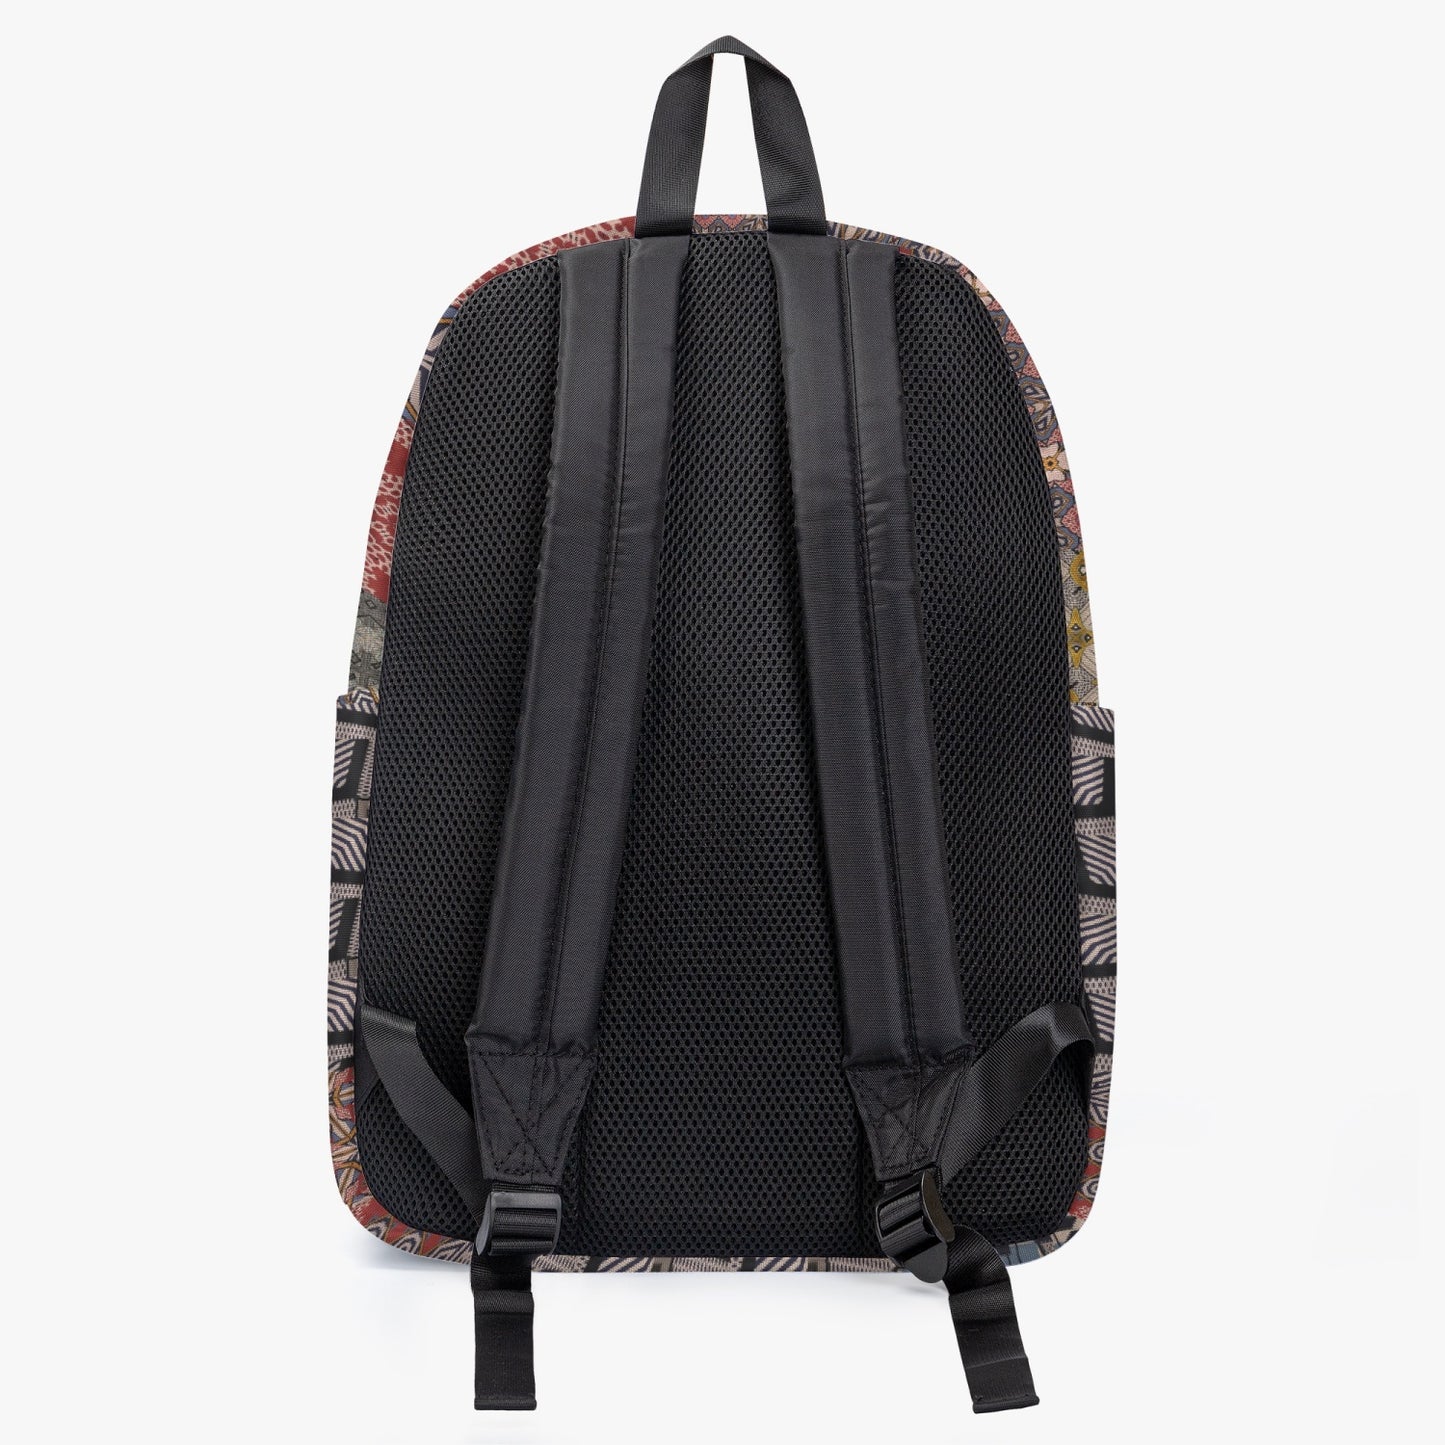 Litsy Medley Canvas Backpack